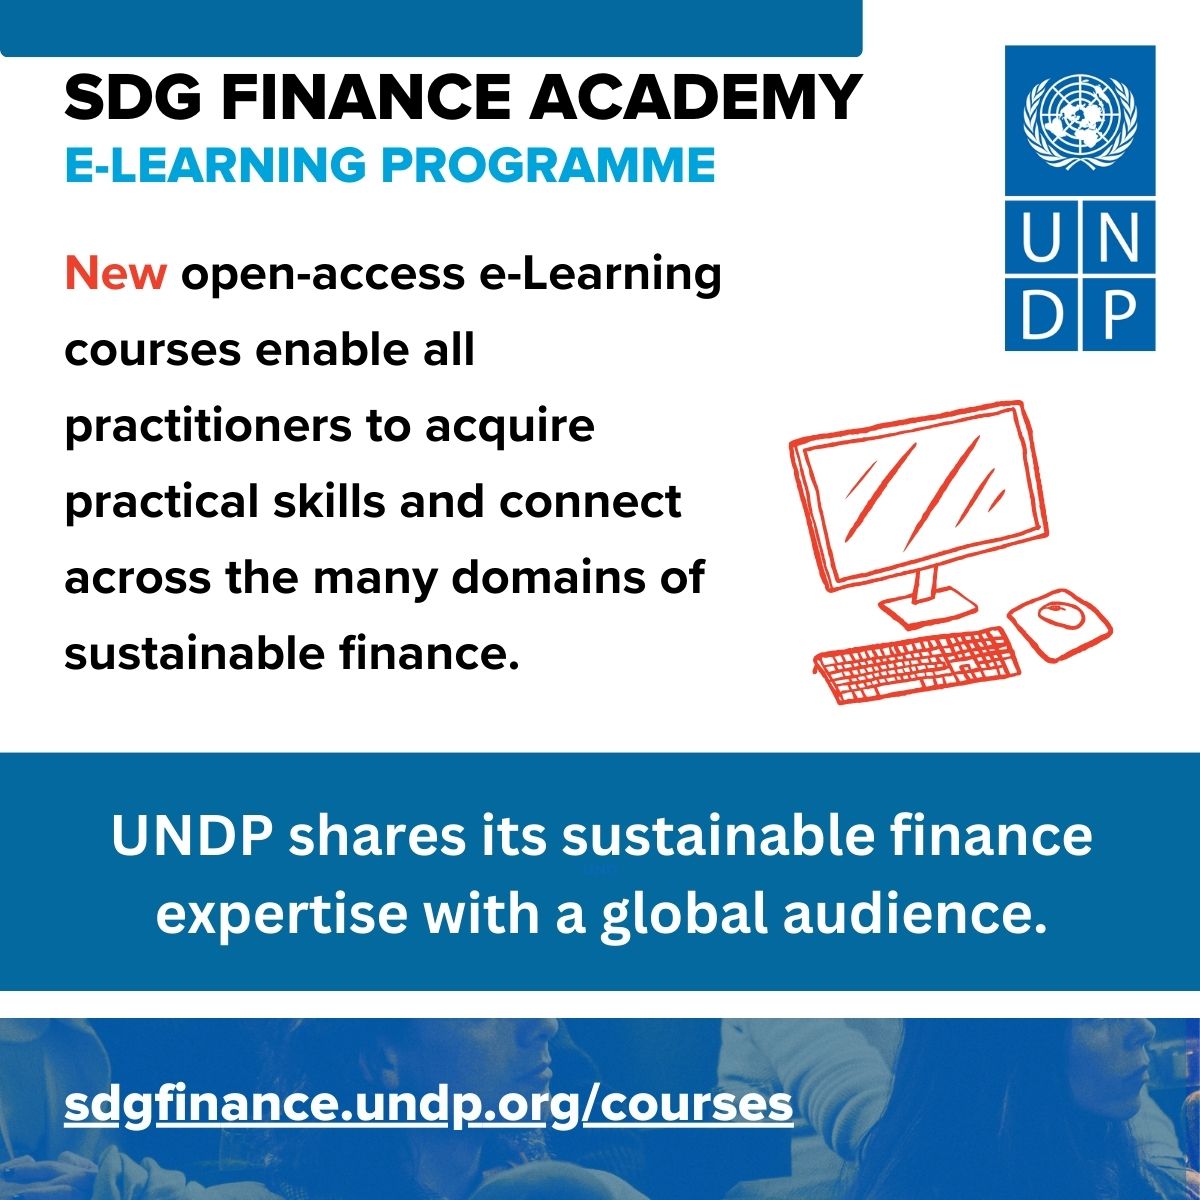 📣 Today, we launched a 🆕 innovative e-Learning Programme on sustainable finance, which provides knowledge and tools to engage with public and private partners on #Fin4Dev.

Join our community of experts to advance the #GlobalGoals. go.undp.org/ShAA